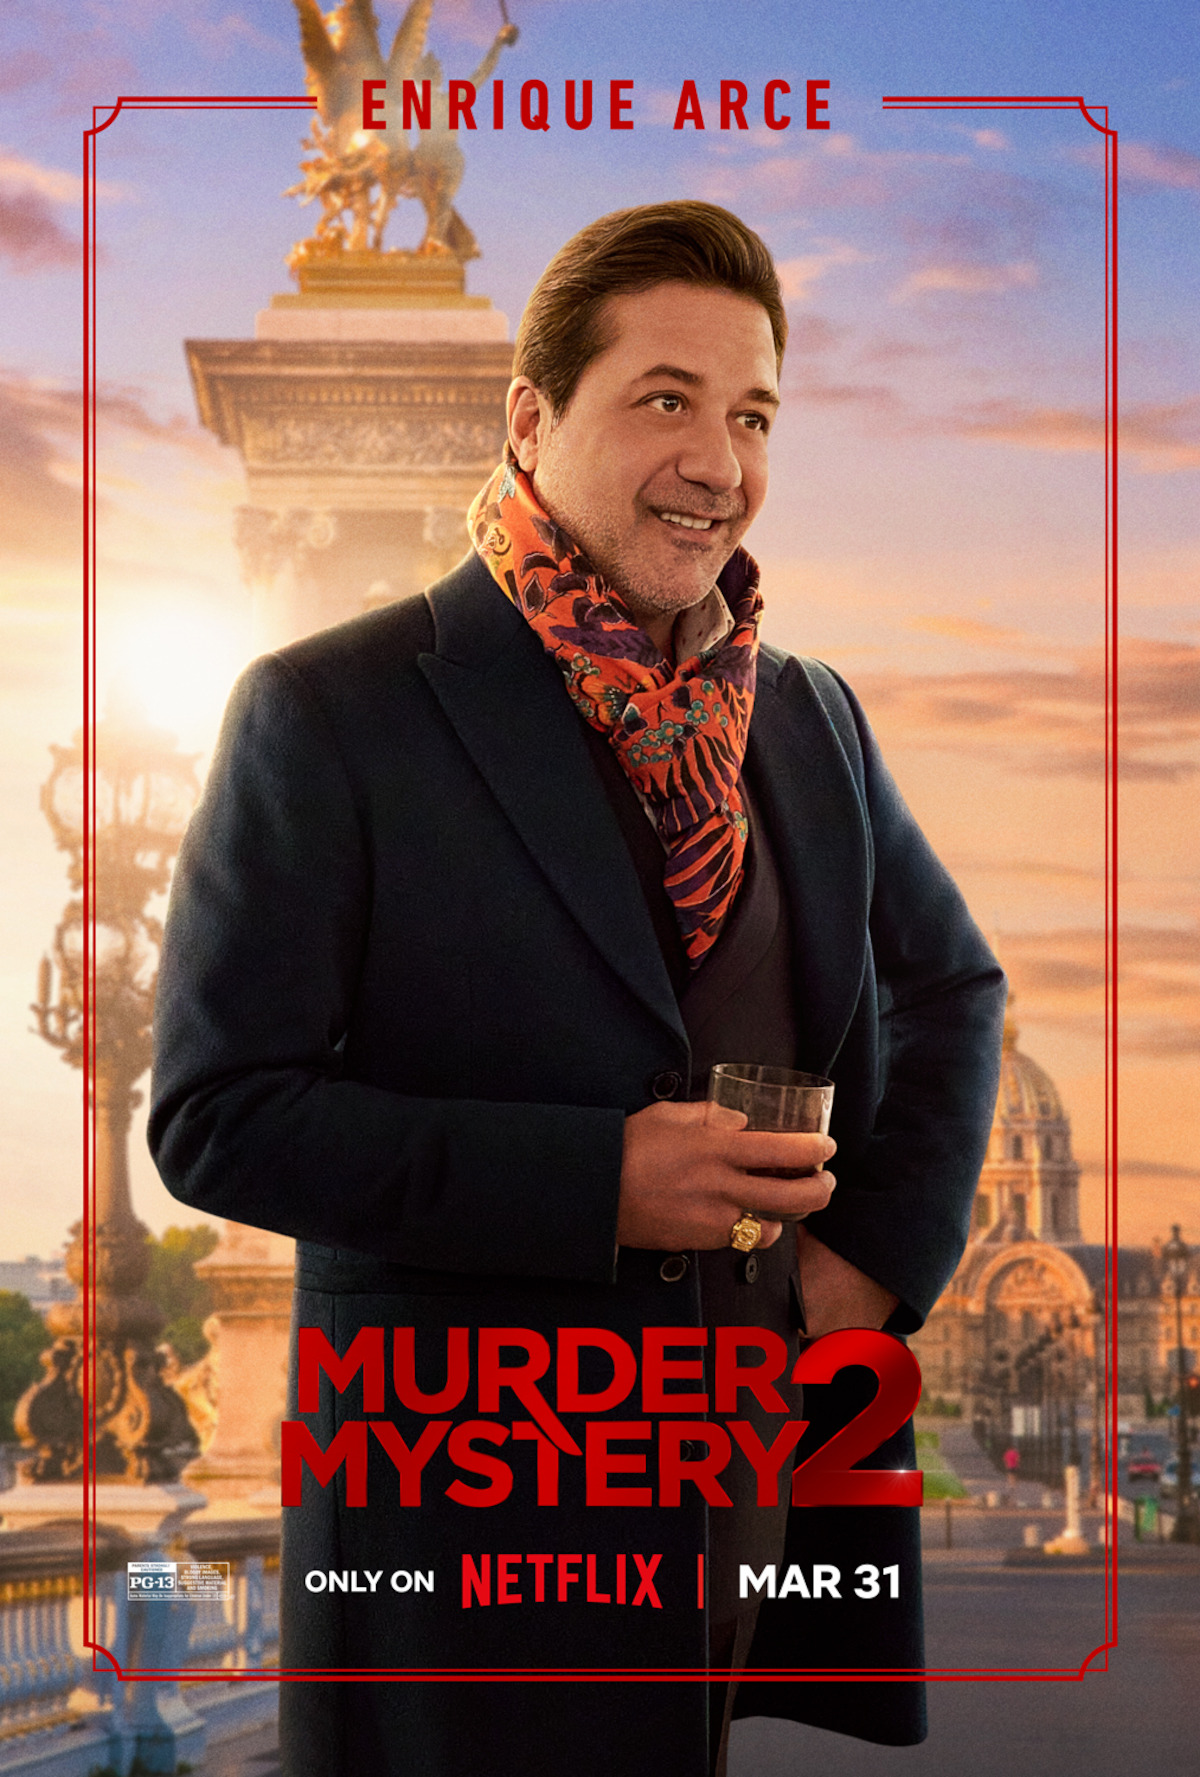 Meet the Murder Mystery 2 cast: who's who in the movie